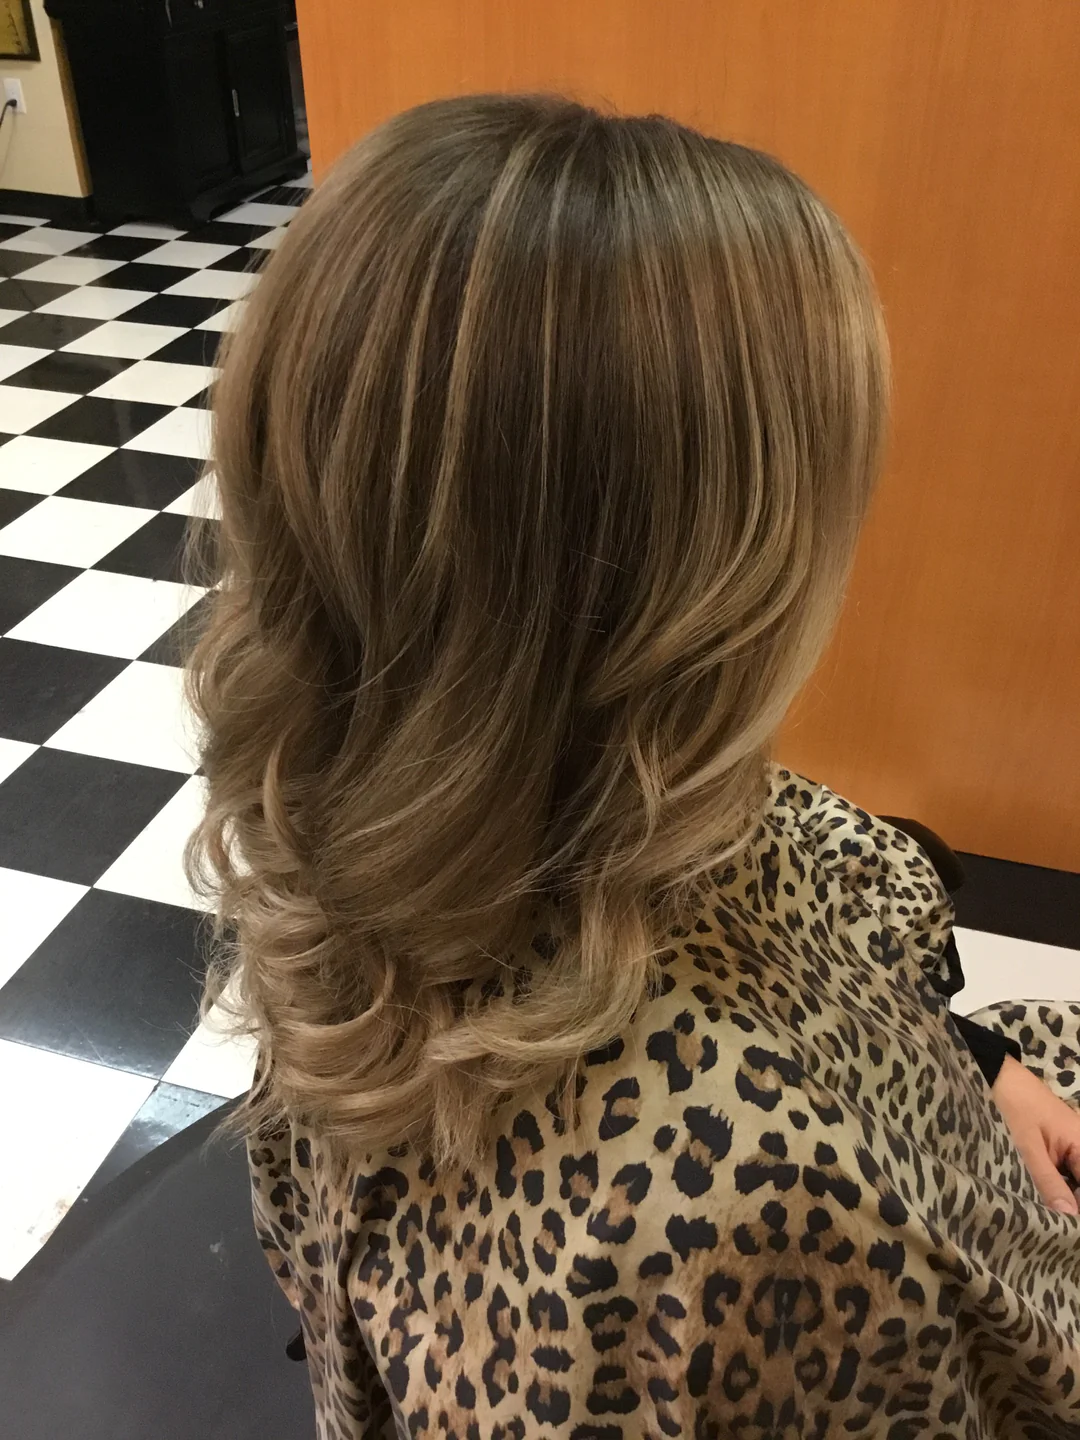 Long Light Dark Blonde with Multi-Dimensional Foiled Highlights Colouring with Natural Curls Cut & Style